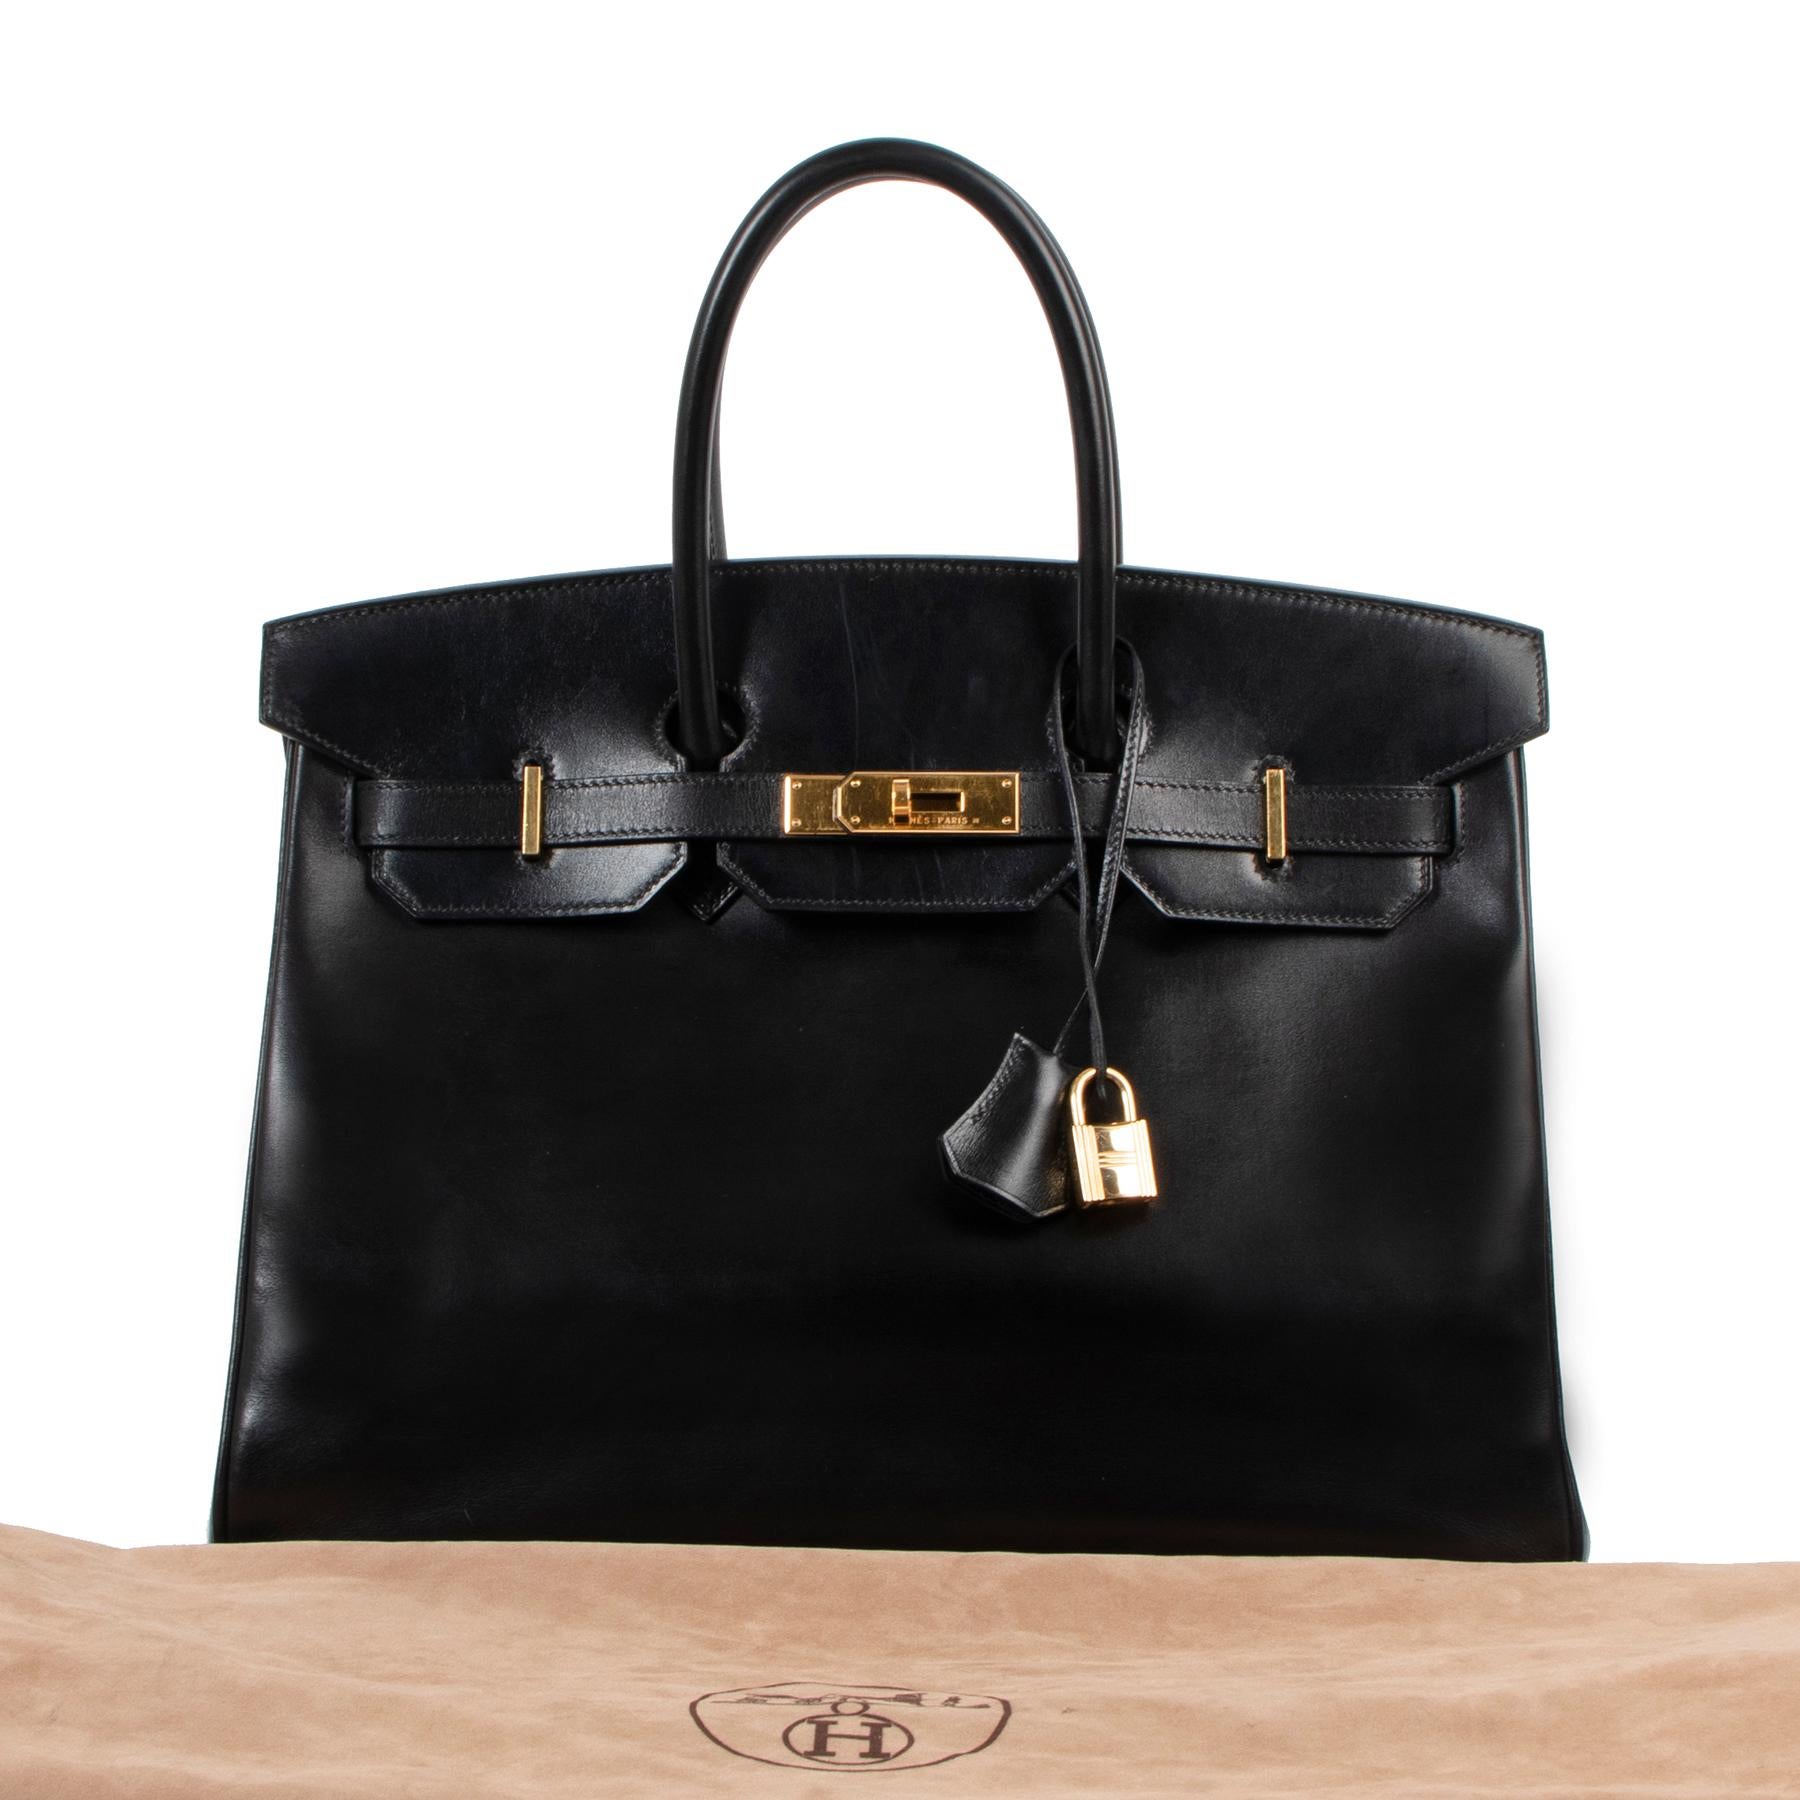 Hermès Birkin 35 Black Box Gold Hardware

This is simply a dream came true. The ultra-coveted Box leather with its lustrous shine and irresistible texture, paired with gleaming golden hardware on this Hermès Birkin 35.

The structured Box leather in